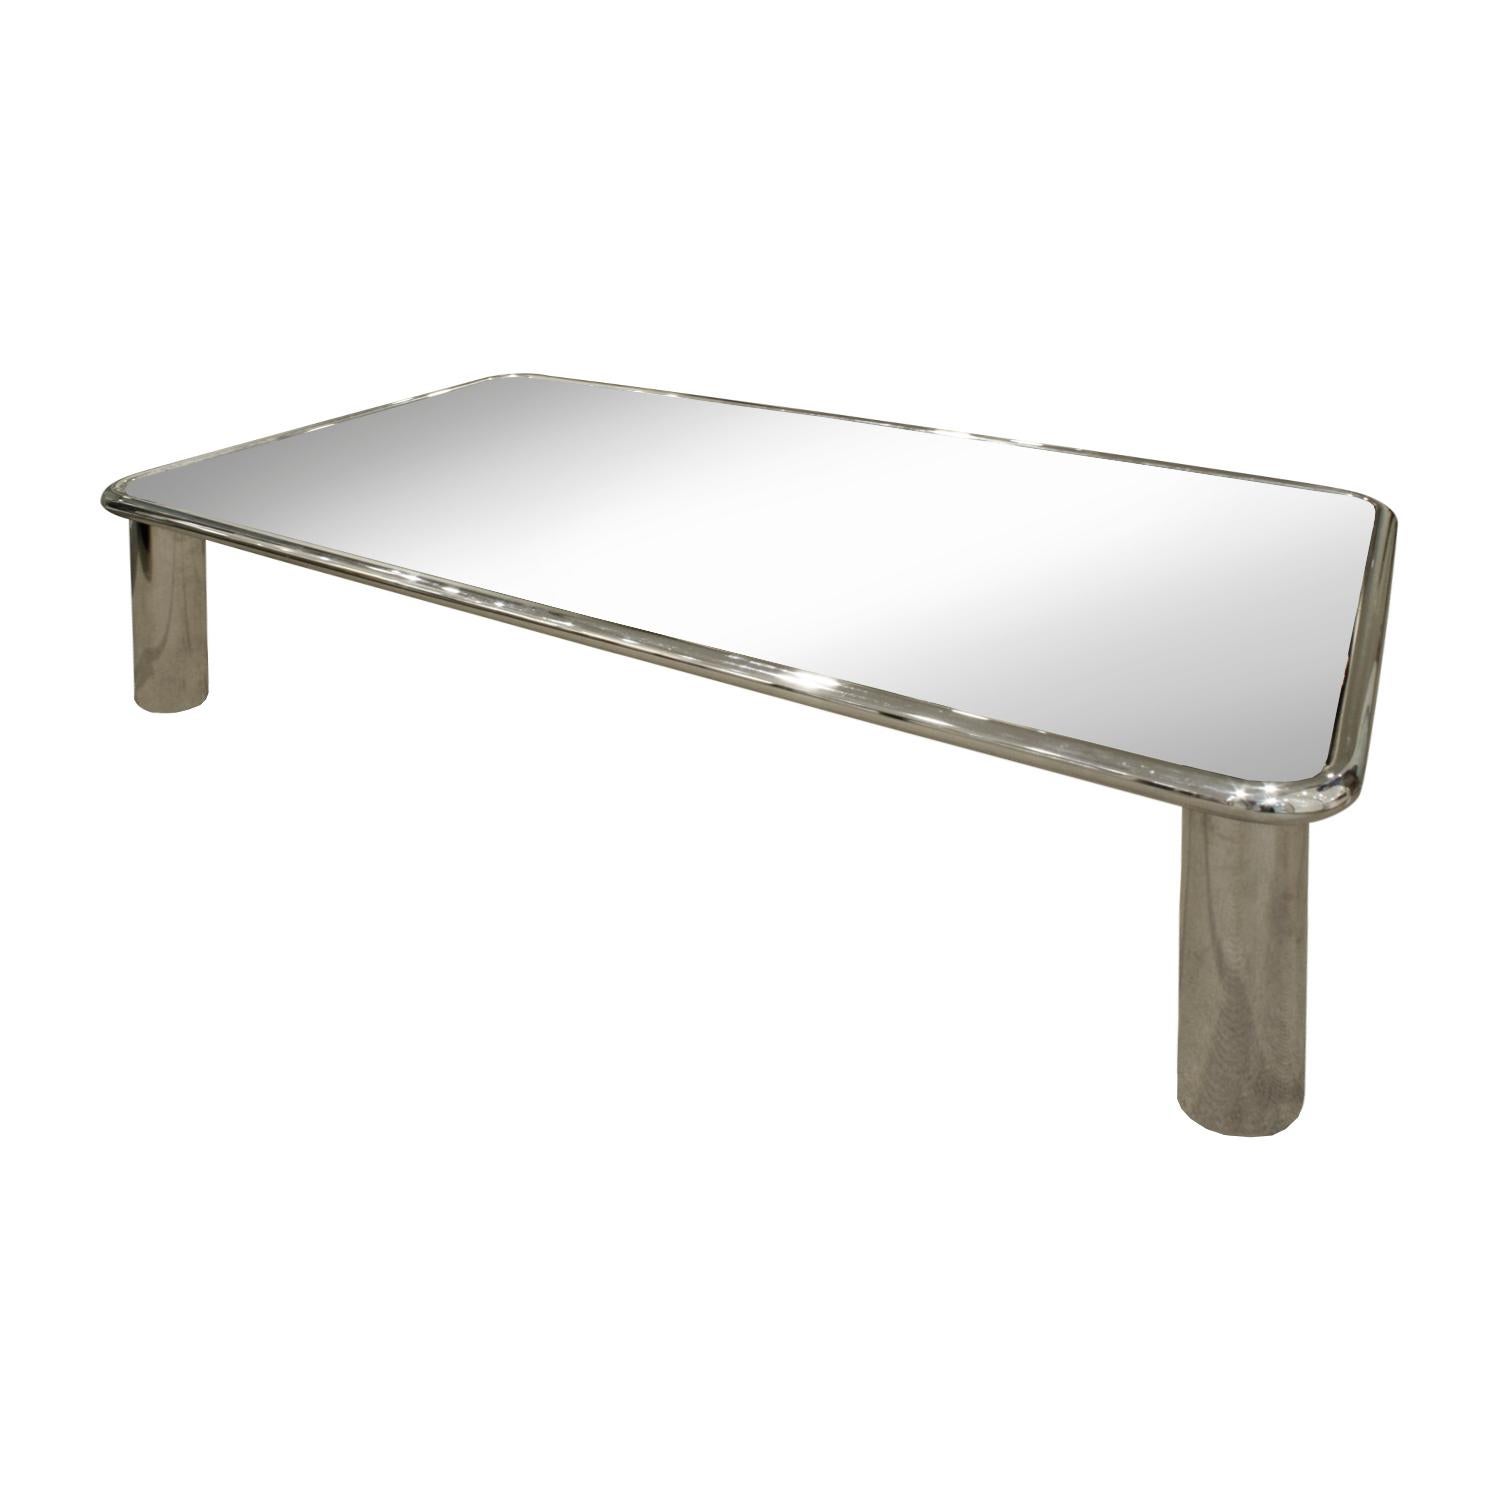 Large coffee table with legs in polished chrome with inset mirror glass top by John Mascheroni, American 1970s. This coffee table is very chic.